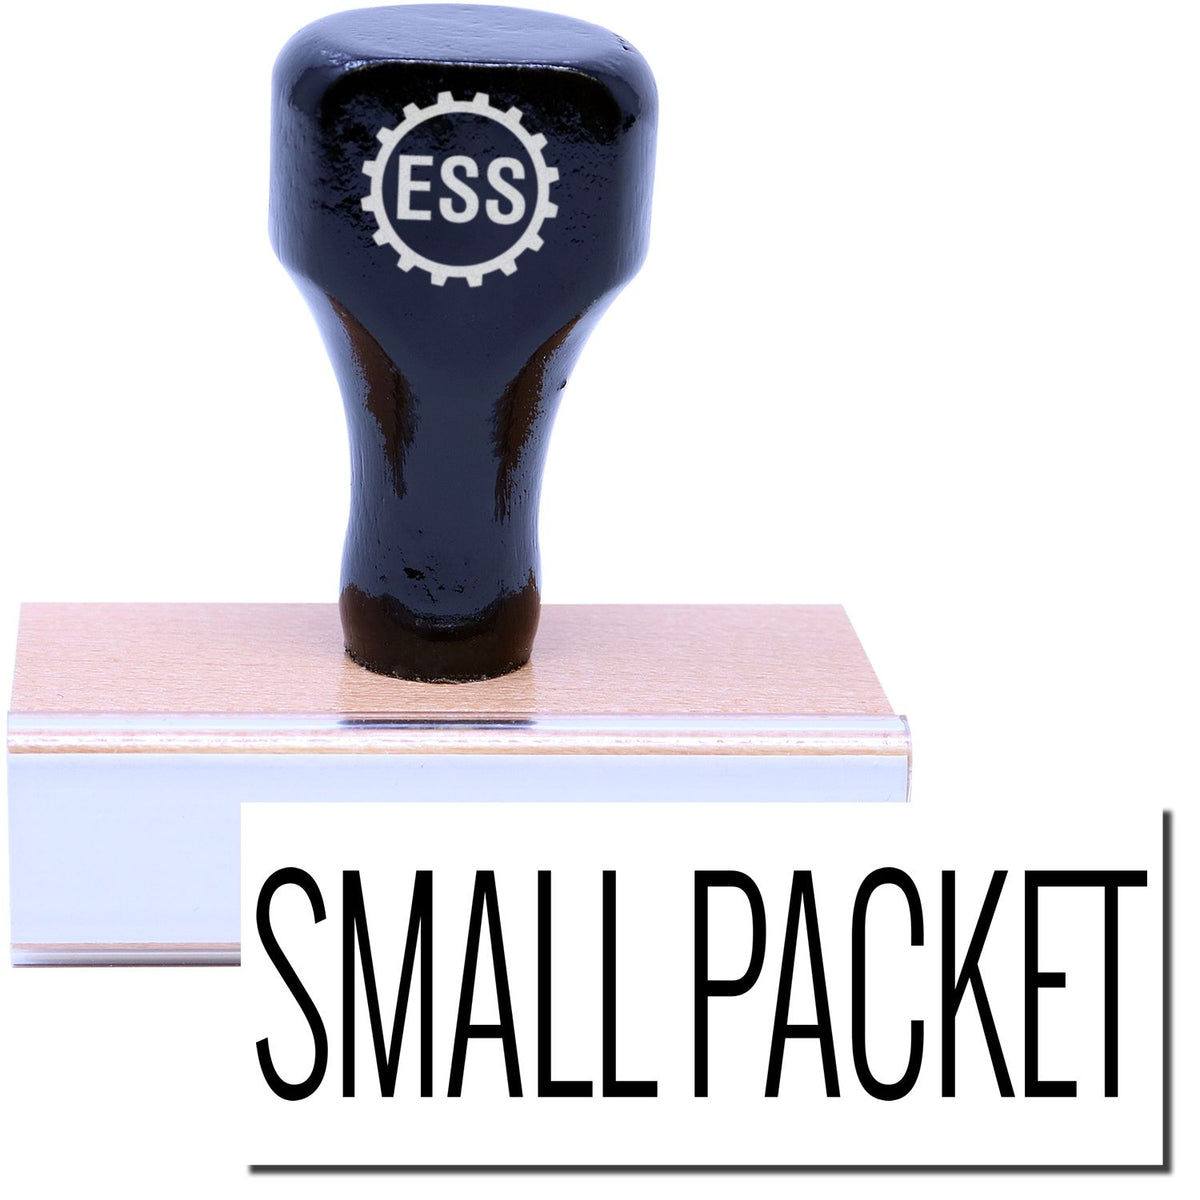 A stock office rubber stamp with a stamped image showing how the text &quot;SMALL PACKET&quot; in a large font is displayed after stamping.